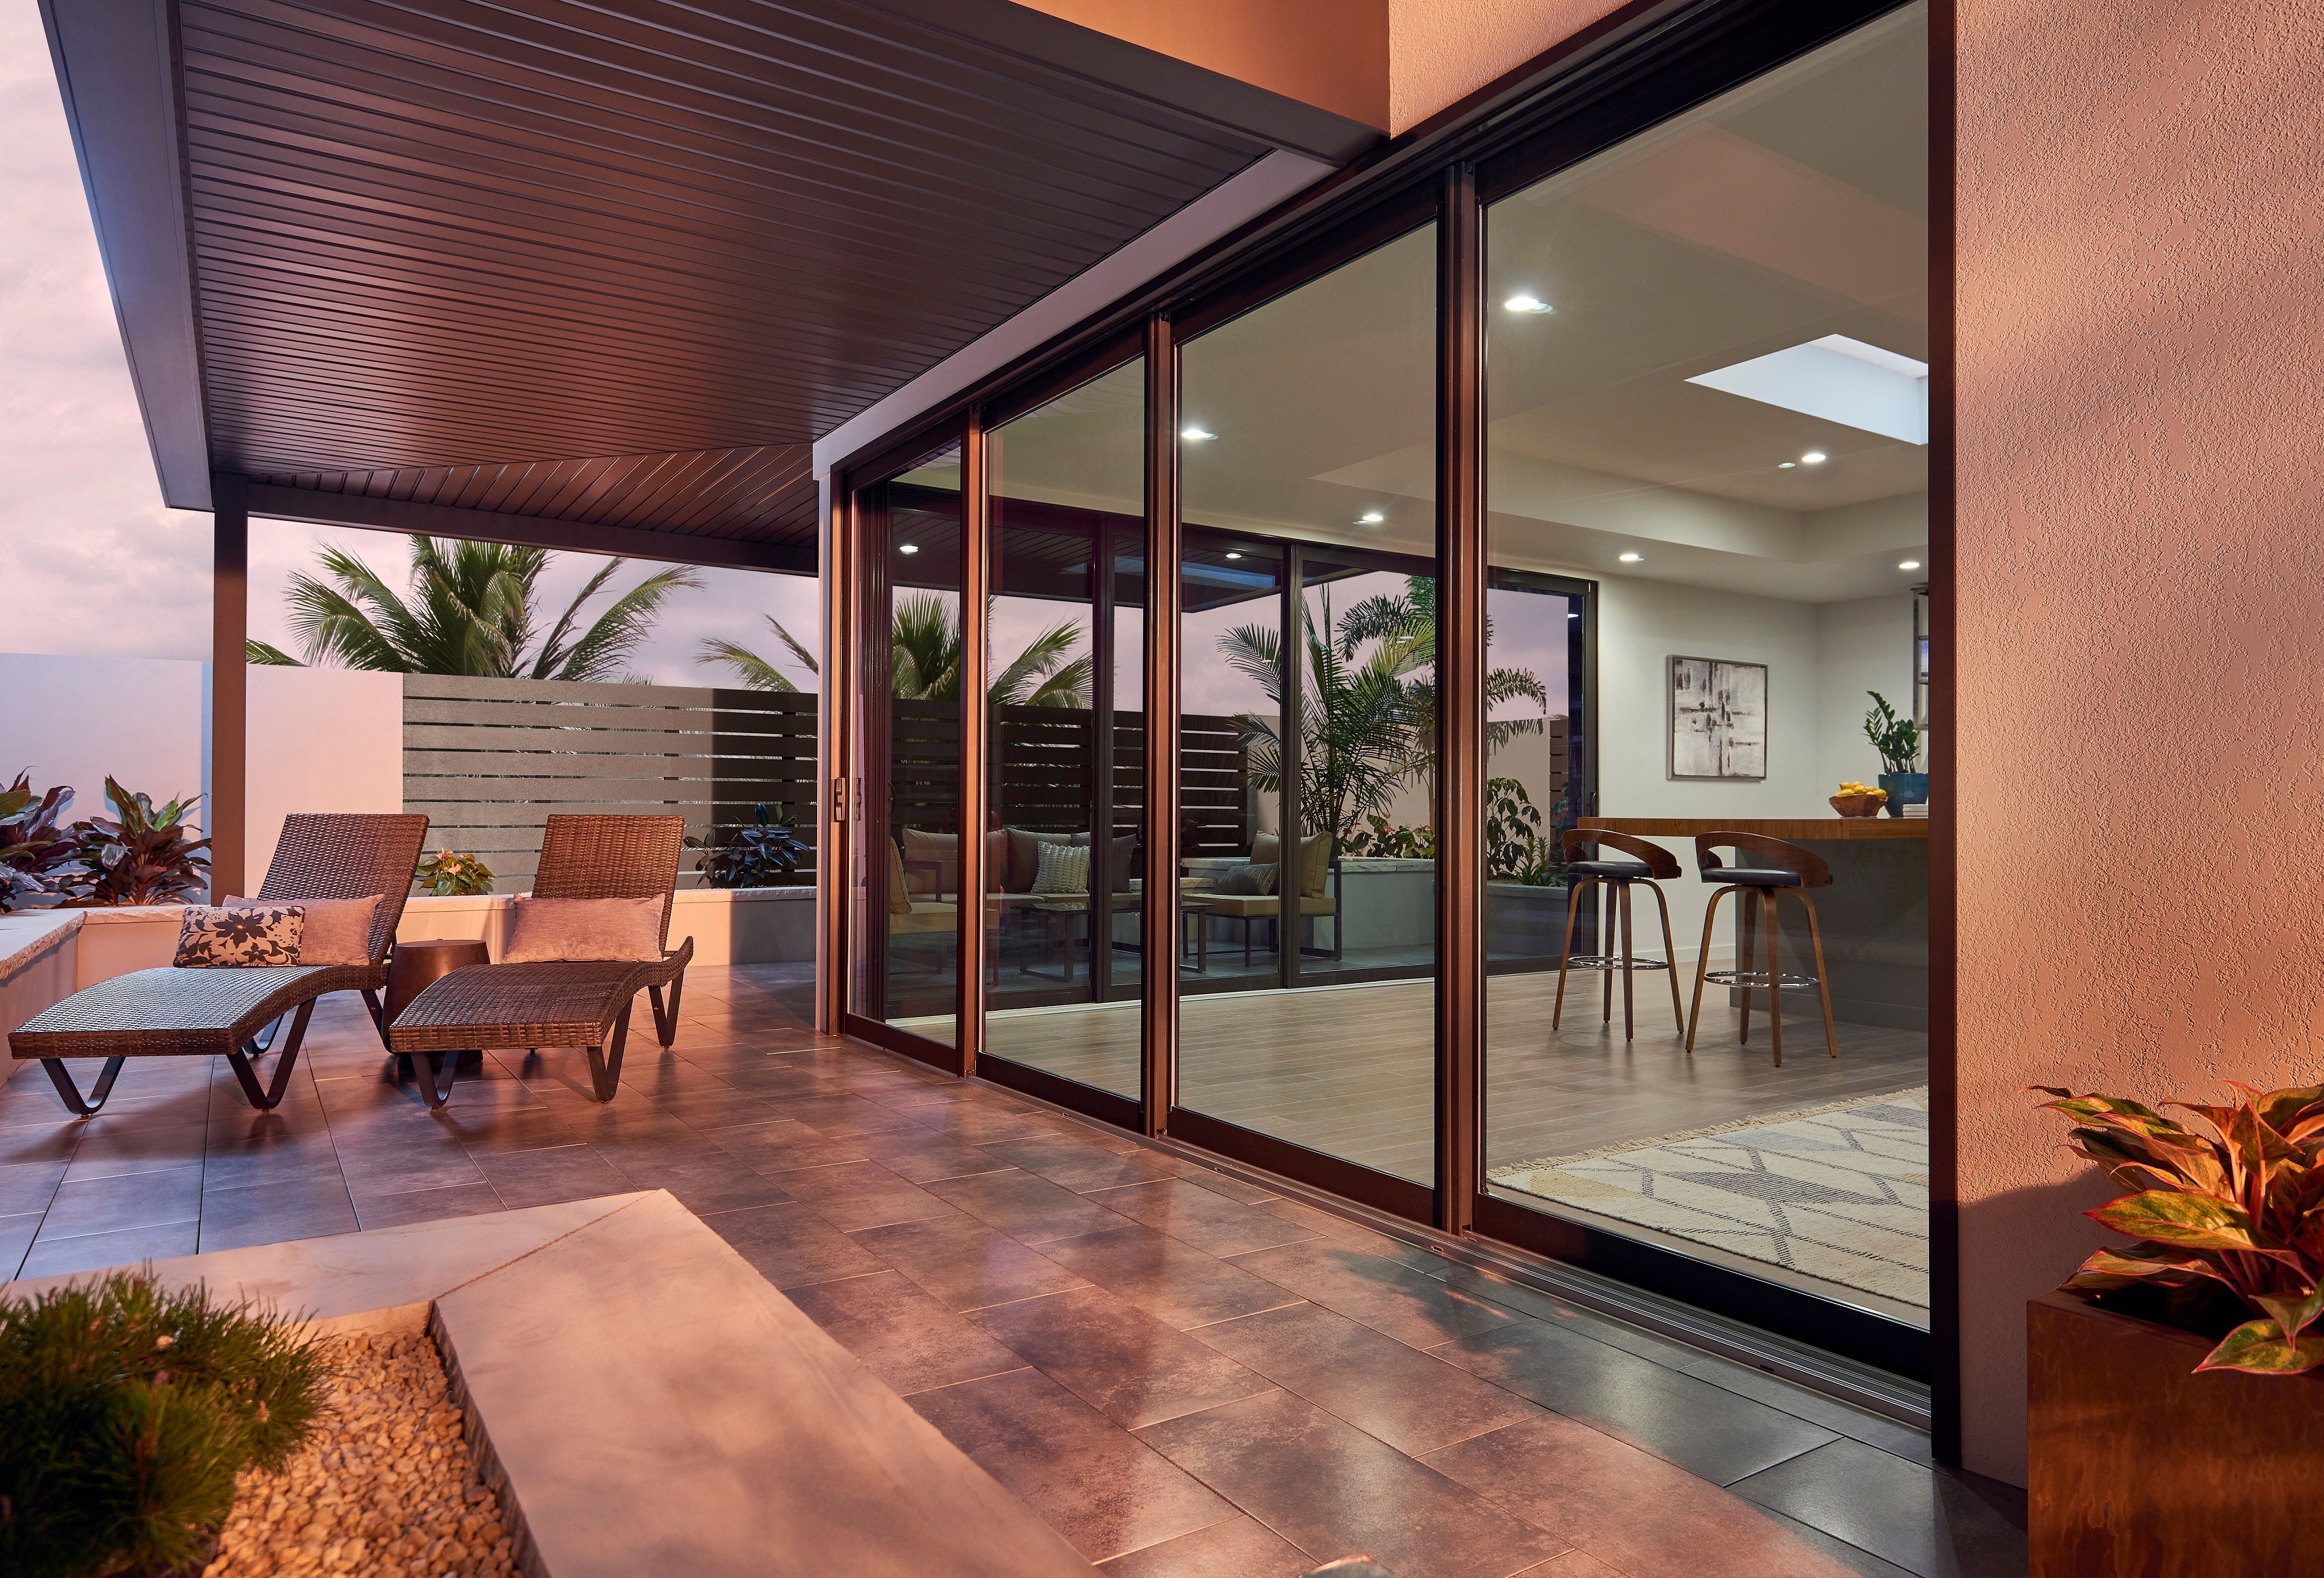 These Behemoth Sliding Glass Doors Bring The Outdoors Inside